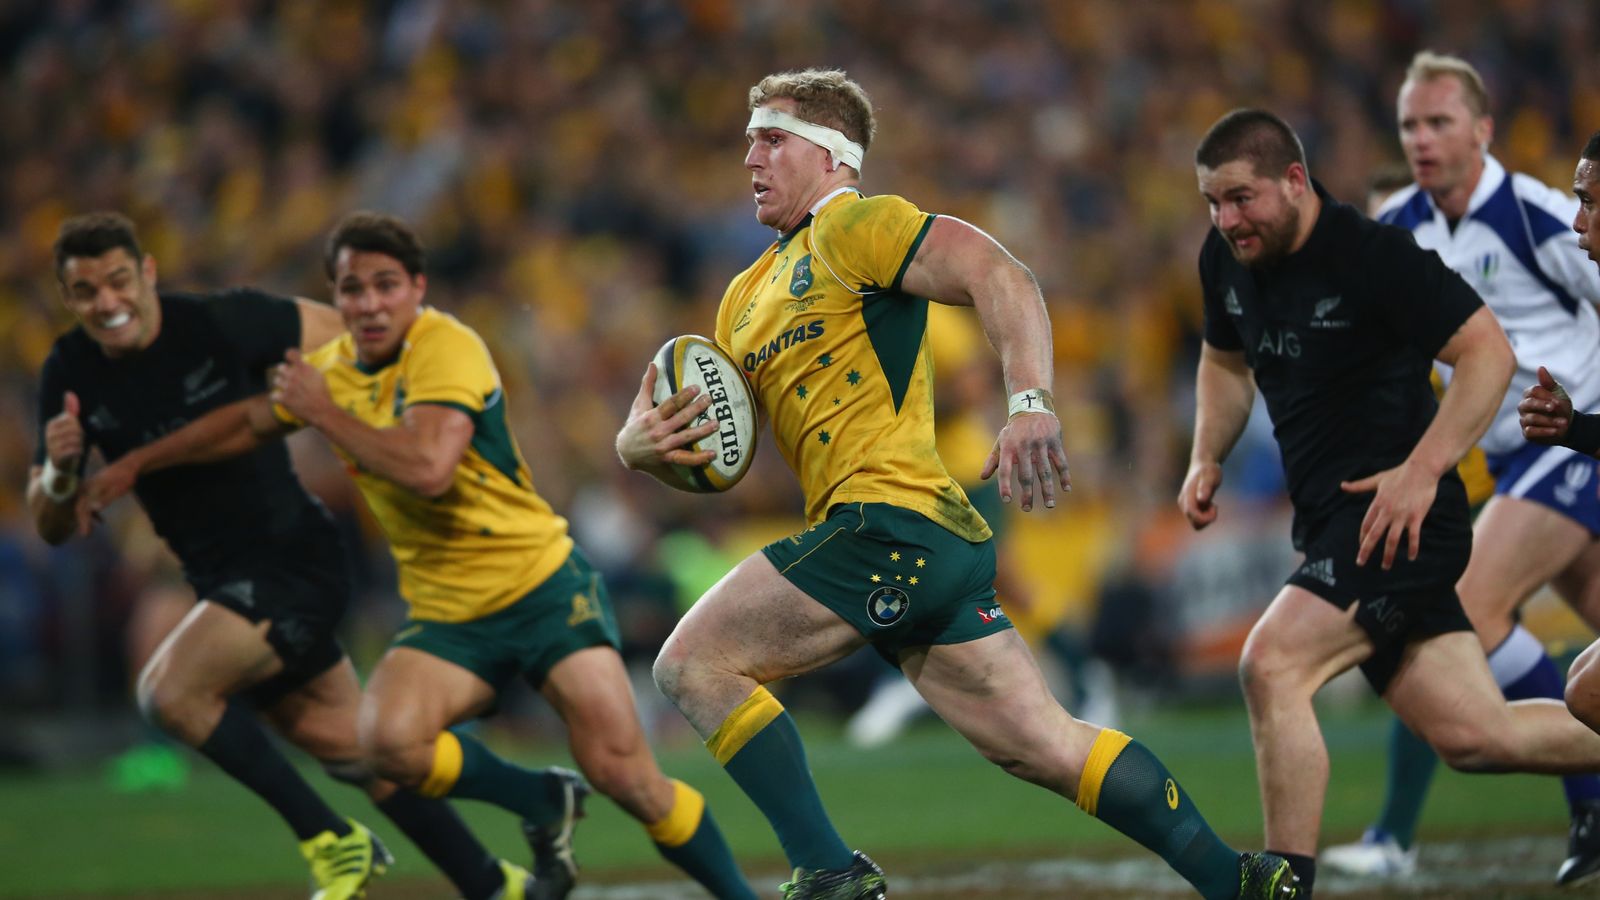 Australia dominate the Sky Sports rugby team of the week Rugby Union